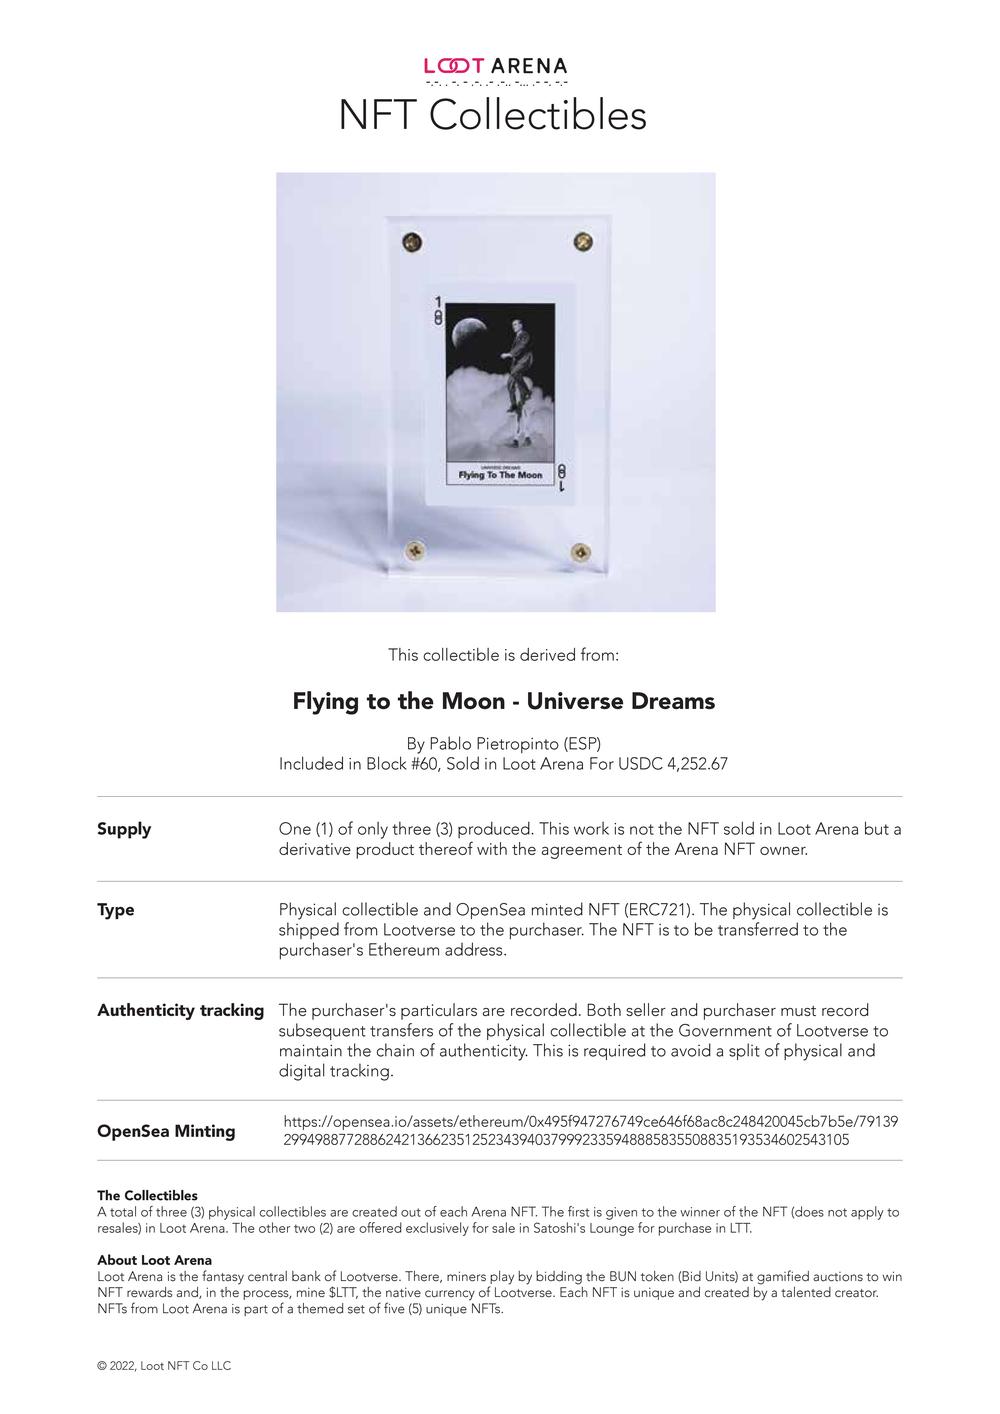 Contract_Flying to the Moon.pdf